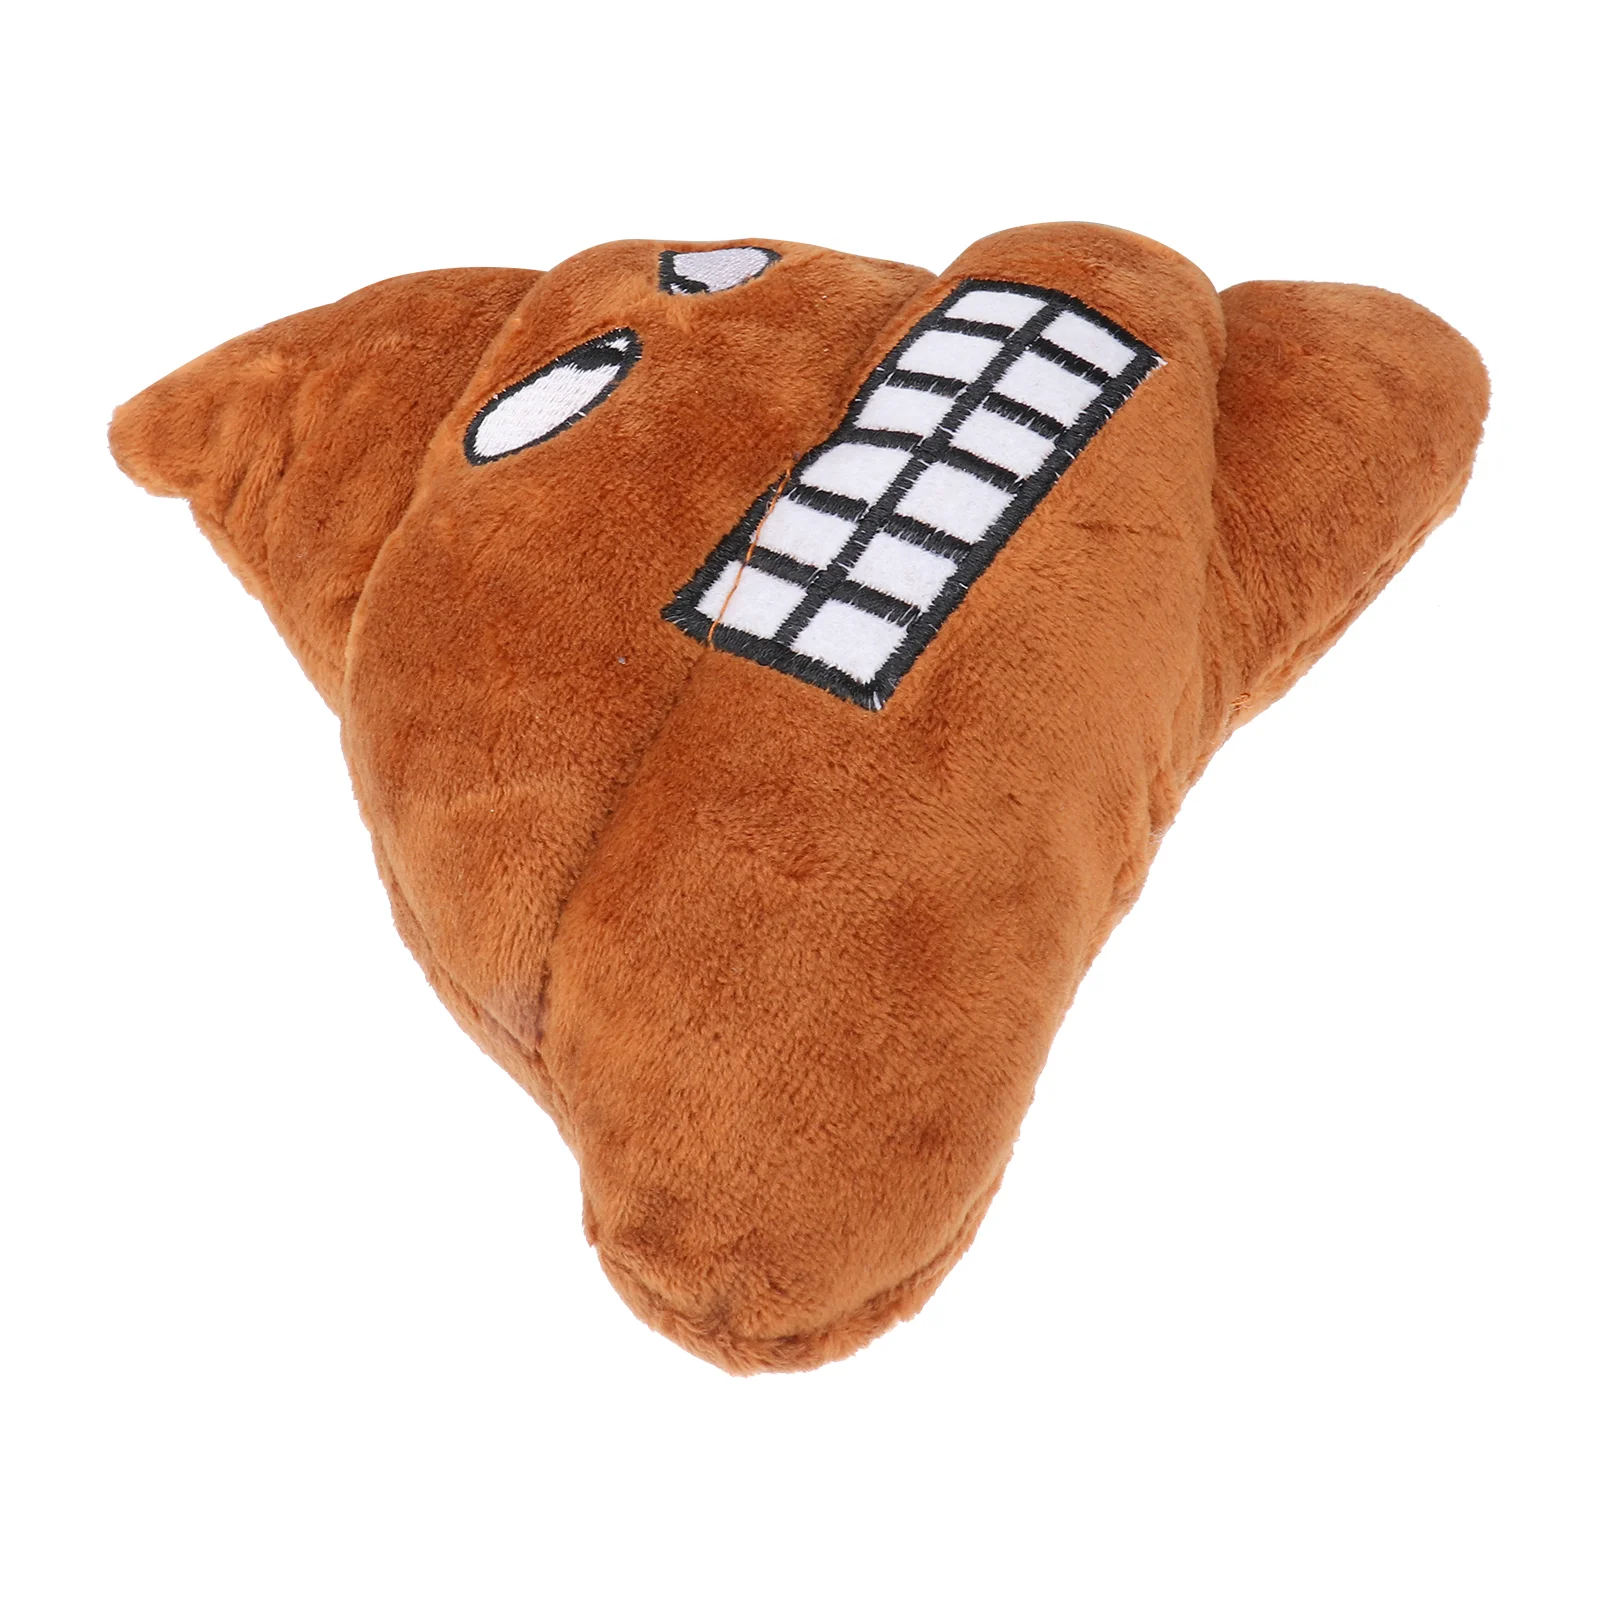 20cm Plush Poop Pillow Stuffed Cushion Toys for Kids Children Party Home Decorations (Bare Teeth)